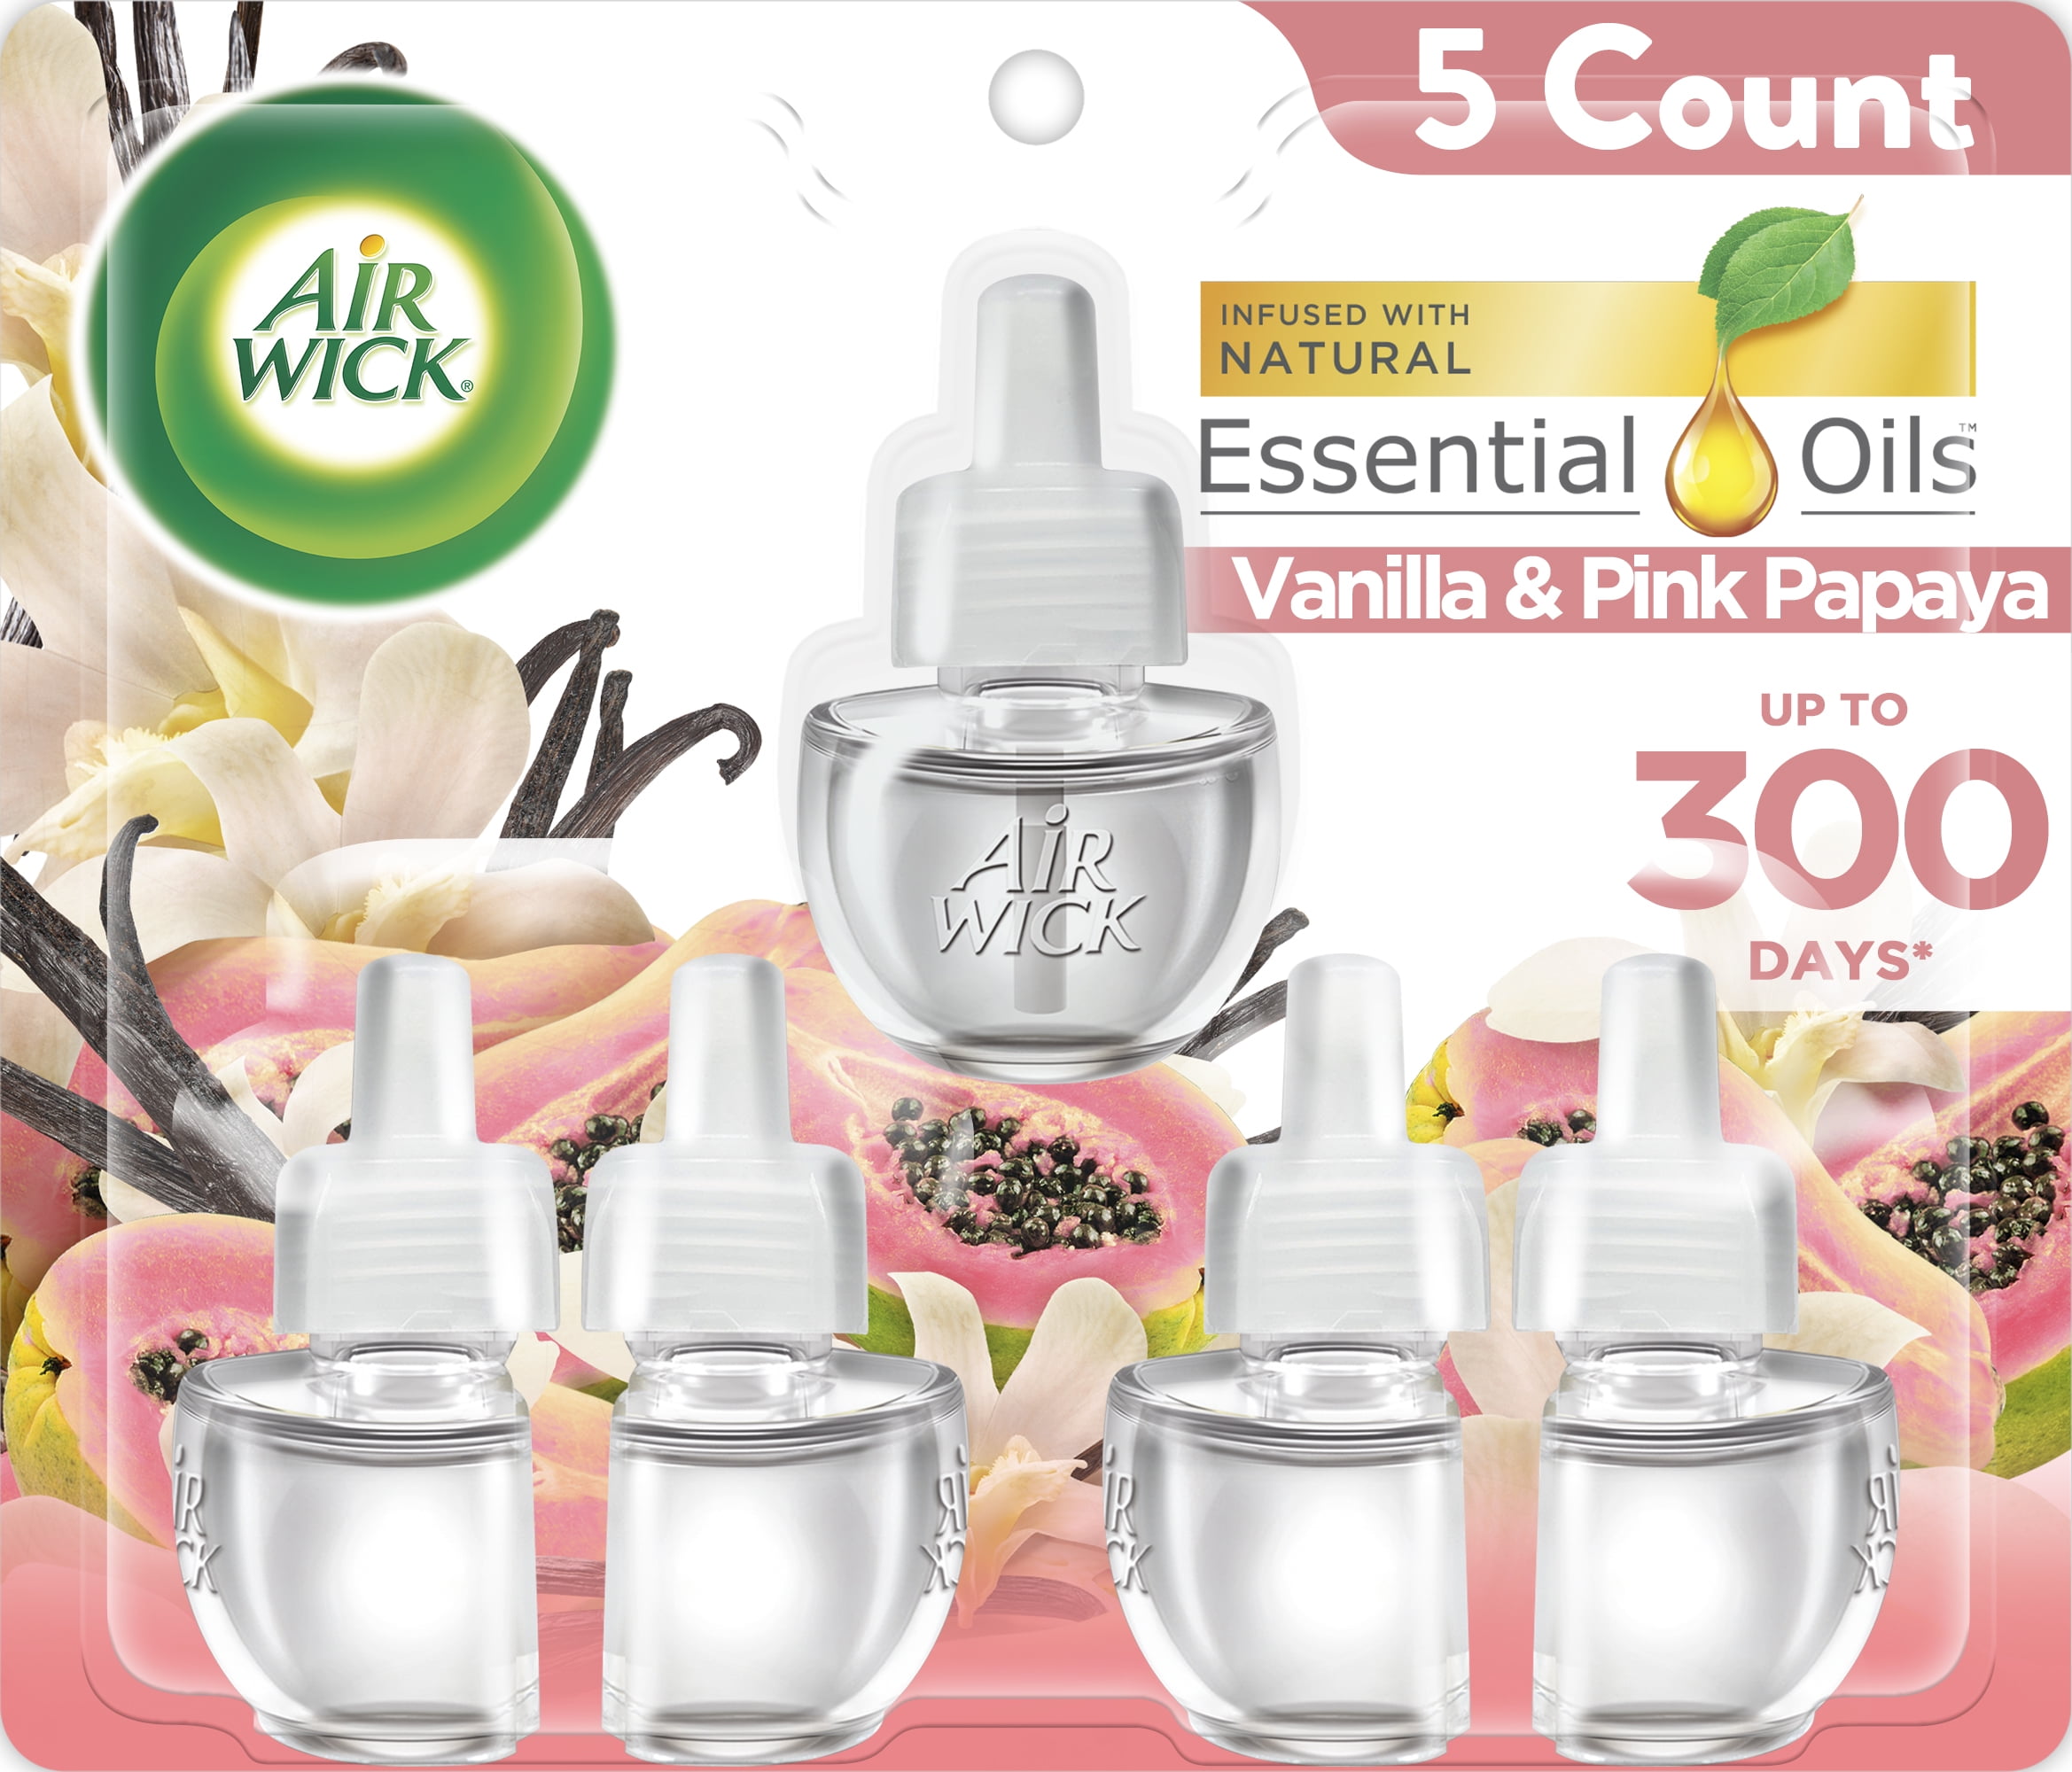 Botanica by Air Wick Plug in Scented Oil Starter Kit (Warmer + 1 